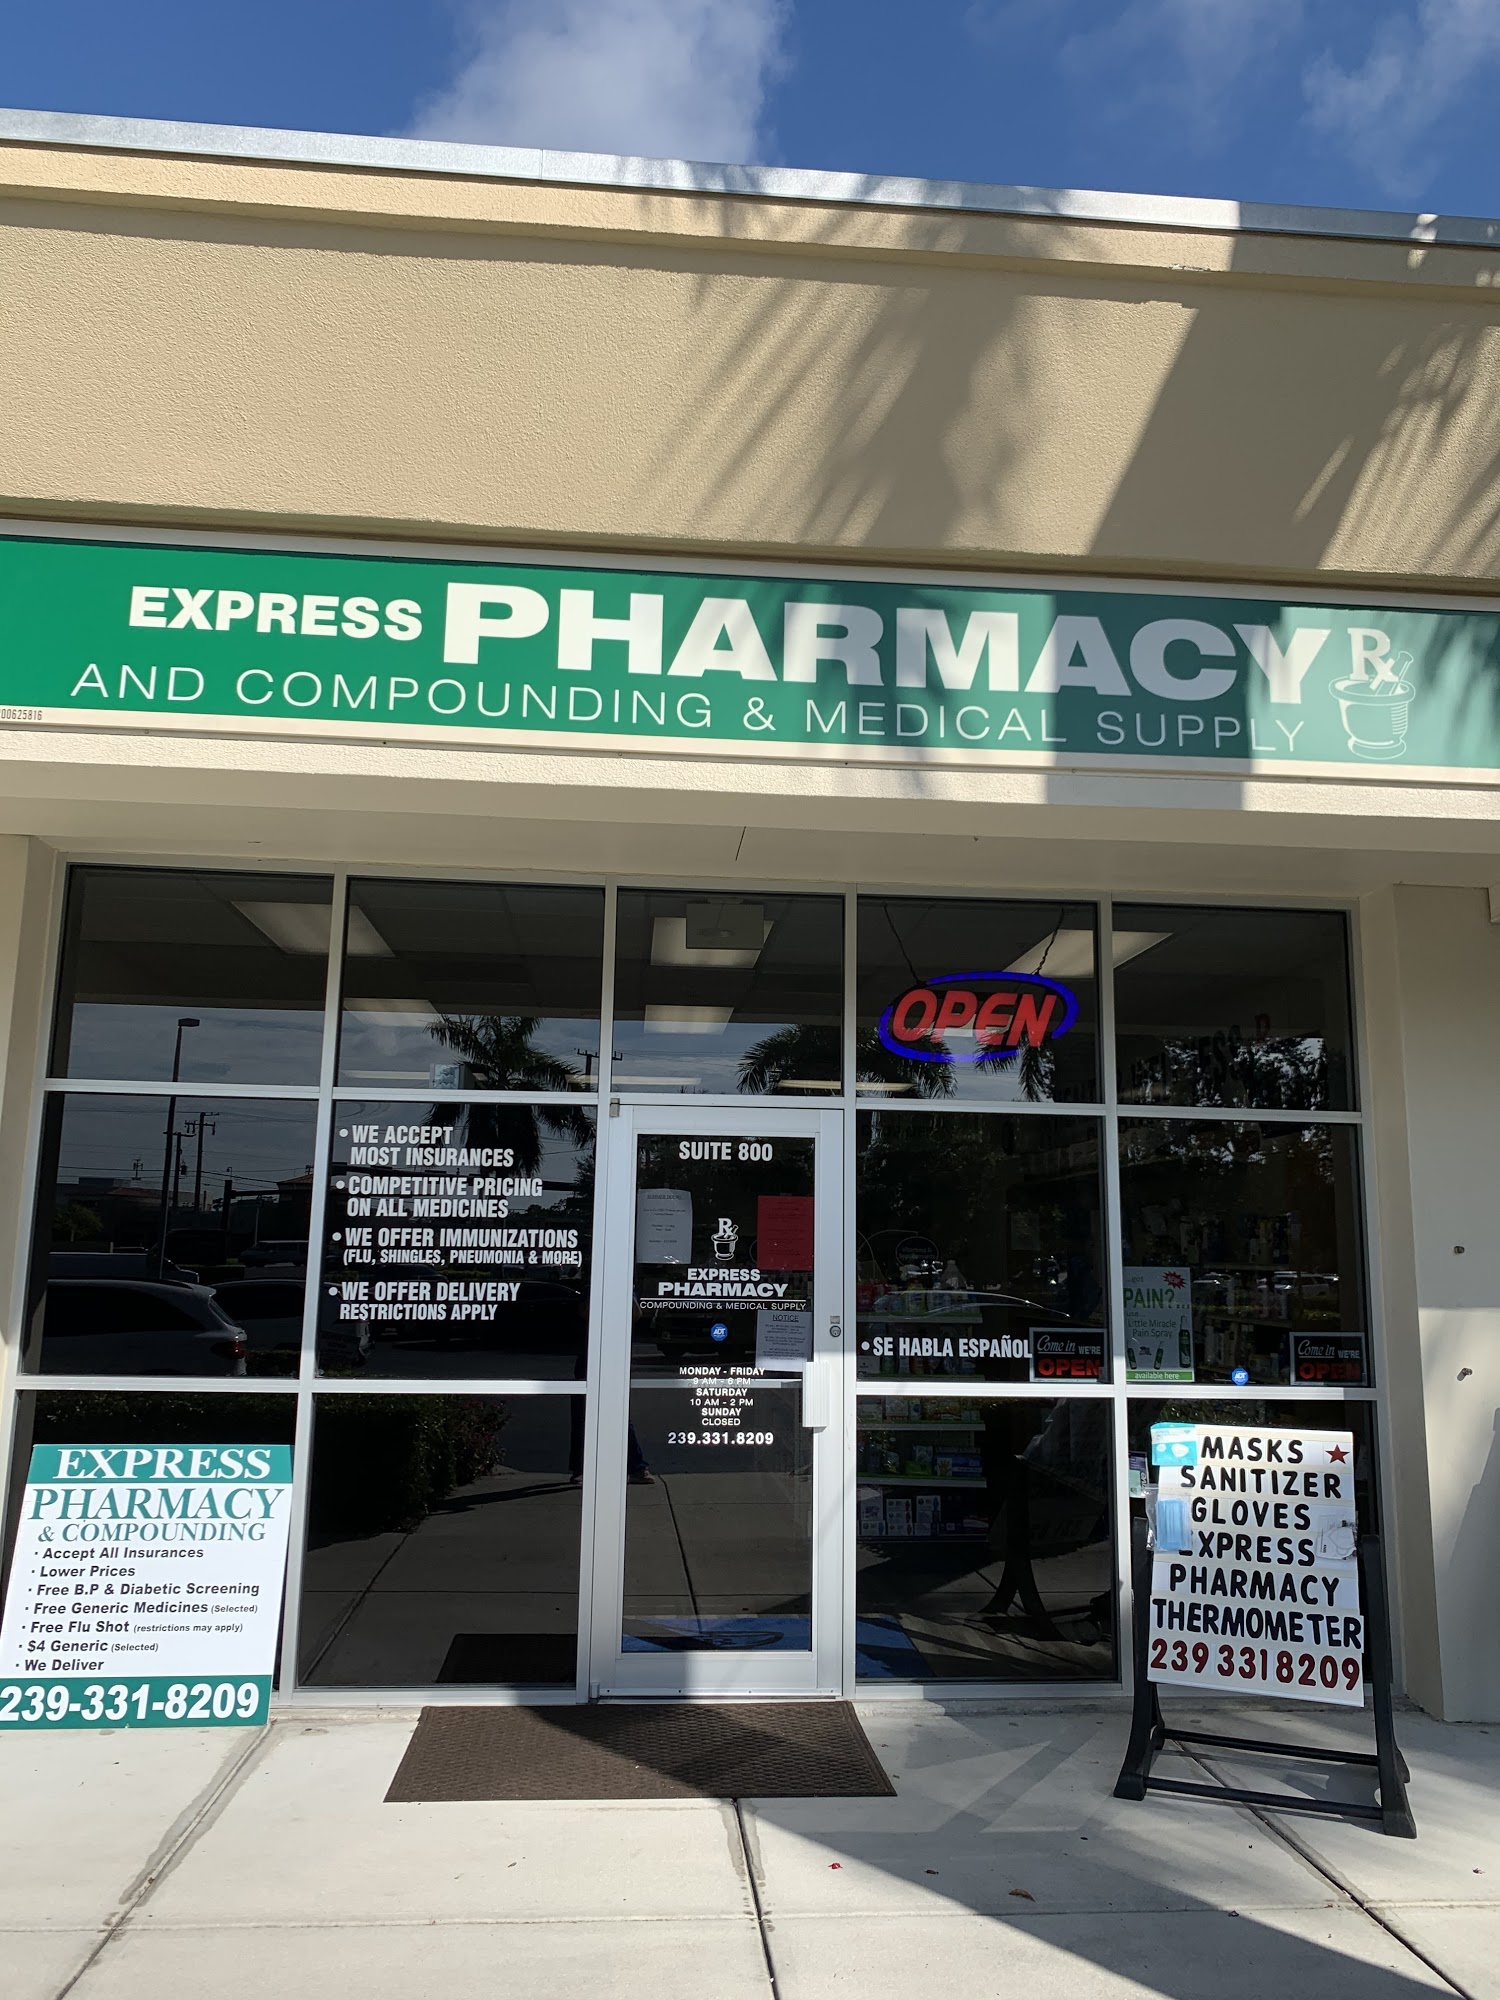 Express Pharmacy (Compound and Medical Supply)